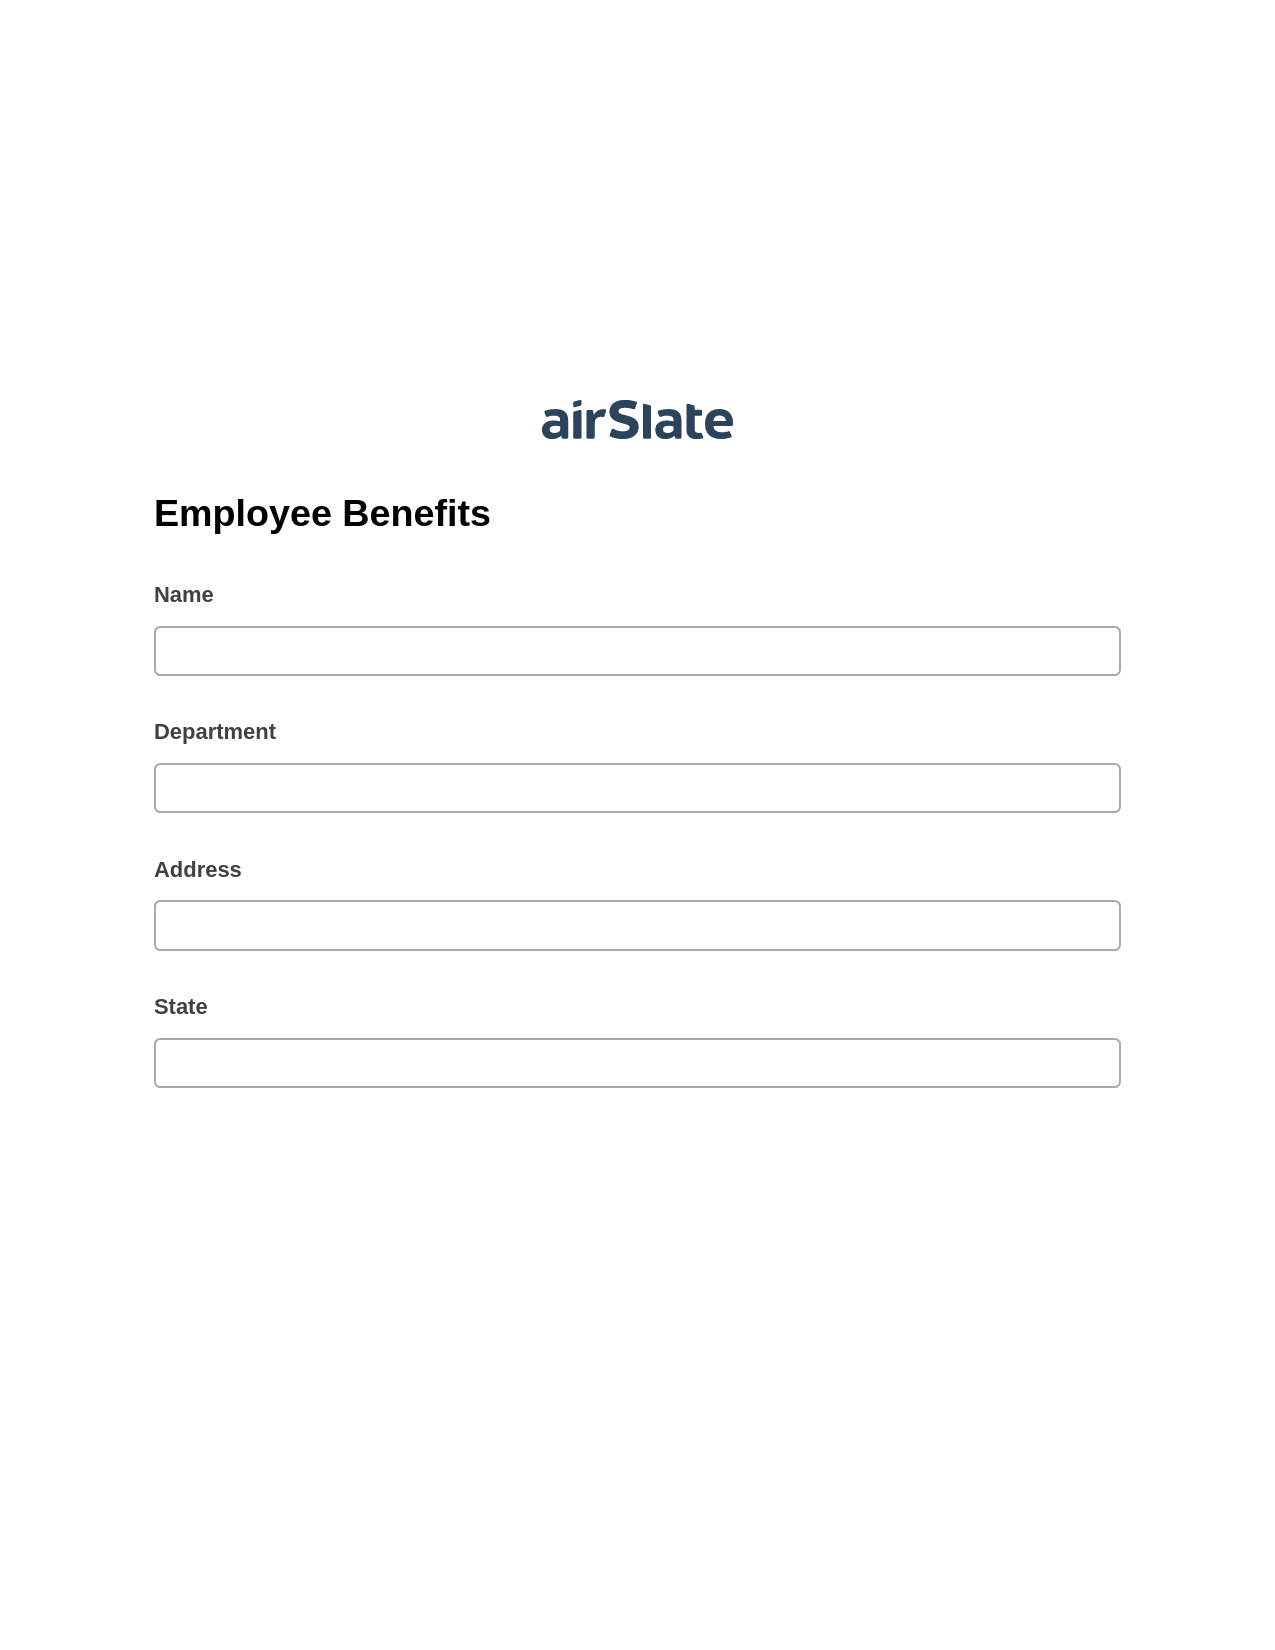 Employee Benefits Pre-fill from CSV File Bot, Send a Slate to MS Dynamics 365 Contact Bot, Box Bot